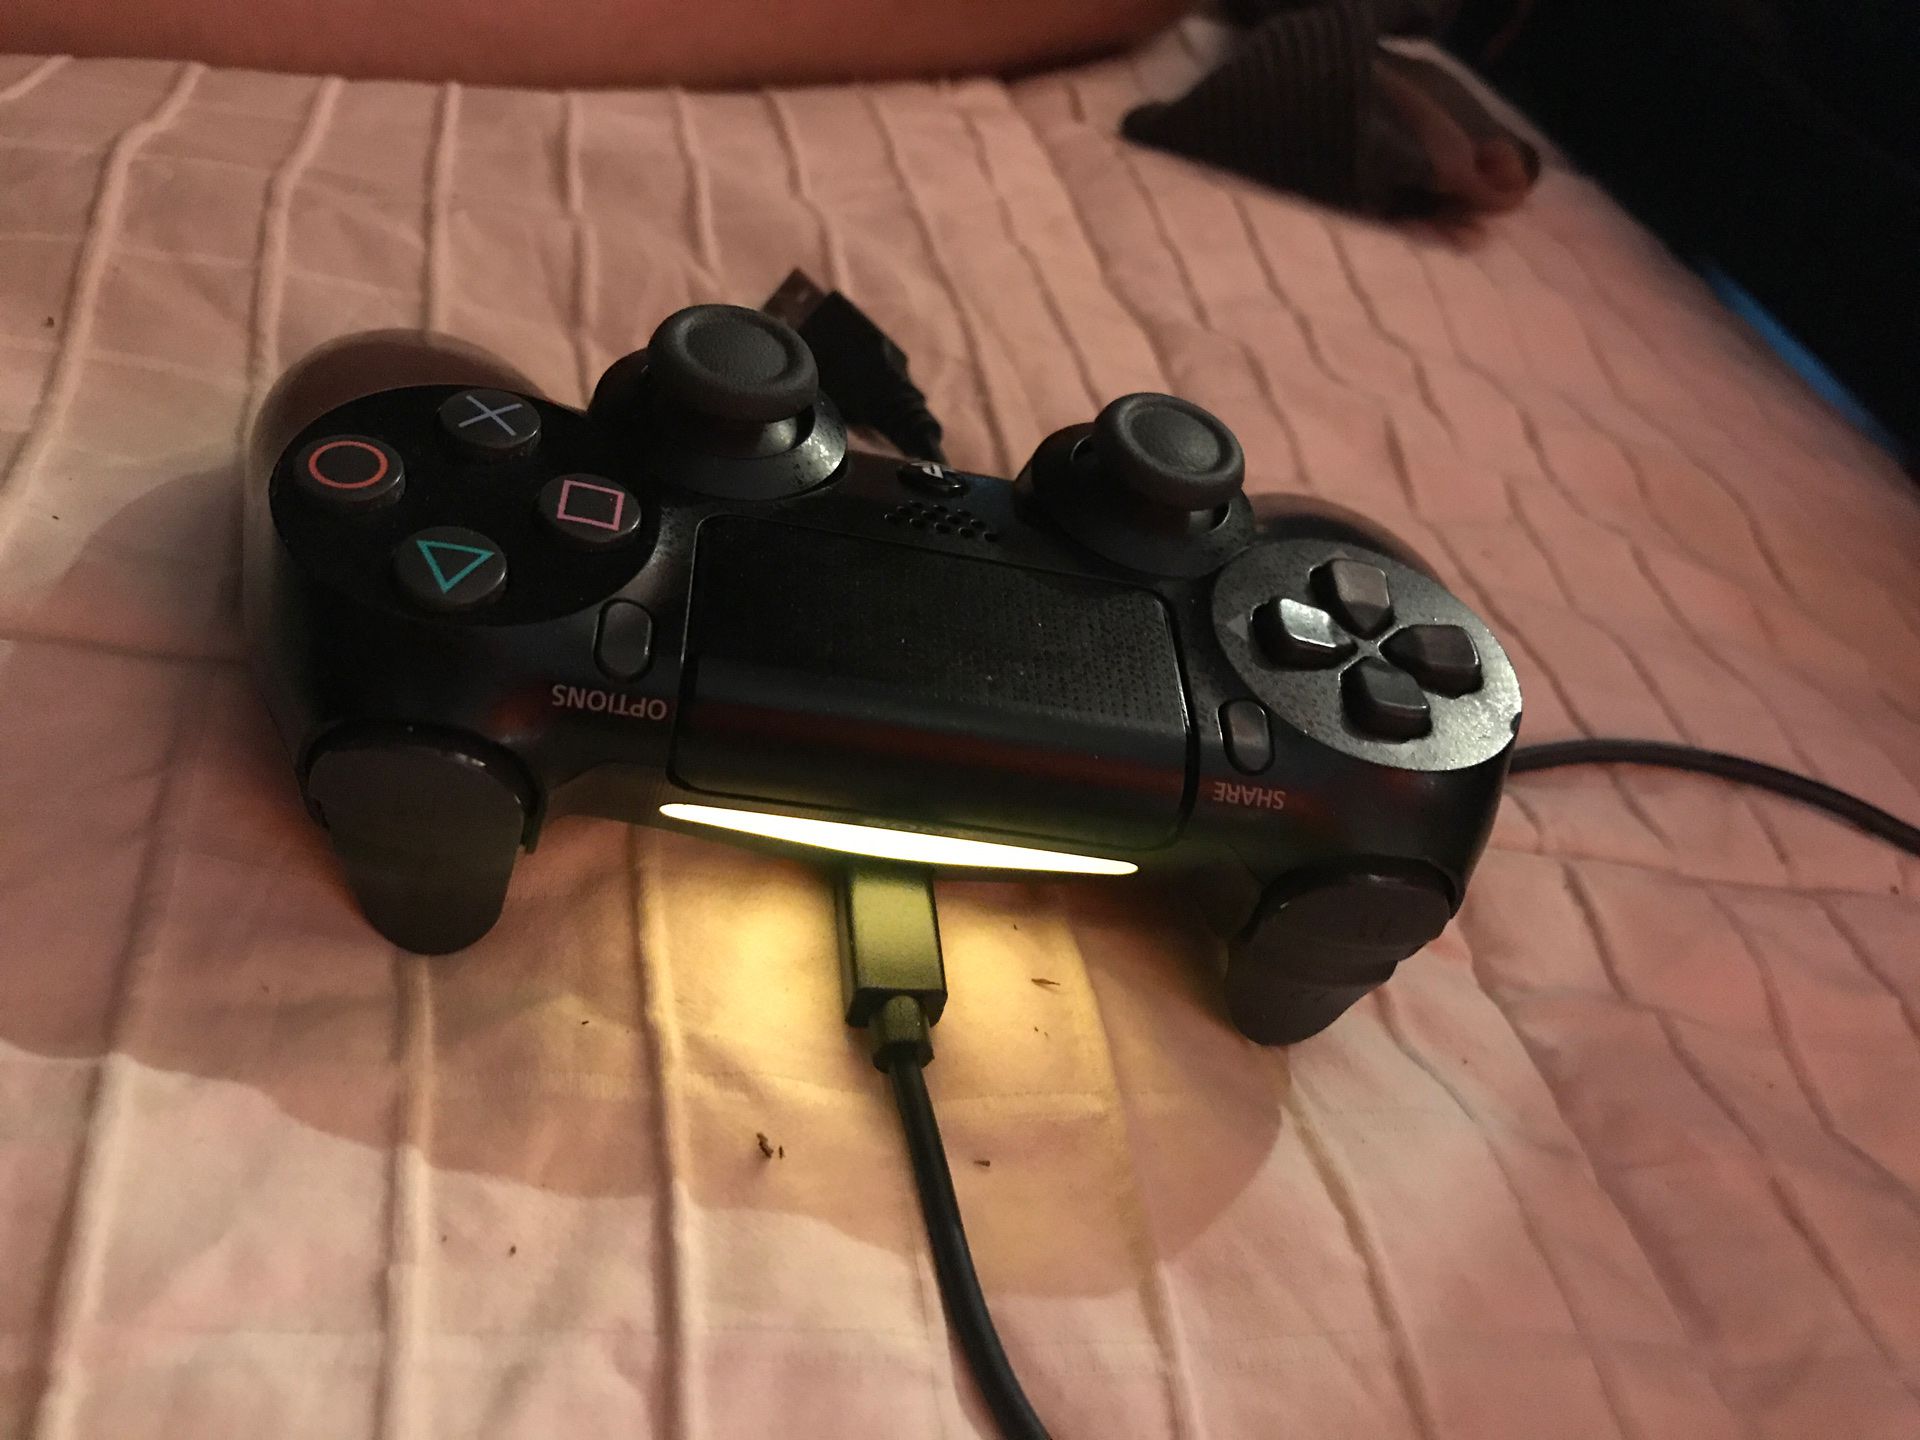 Ps4 controller (won’t work for some reason ) my loss your gain if you can figure it out